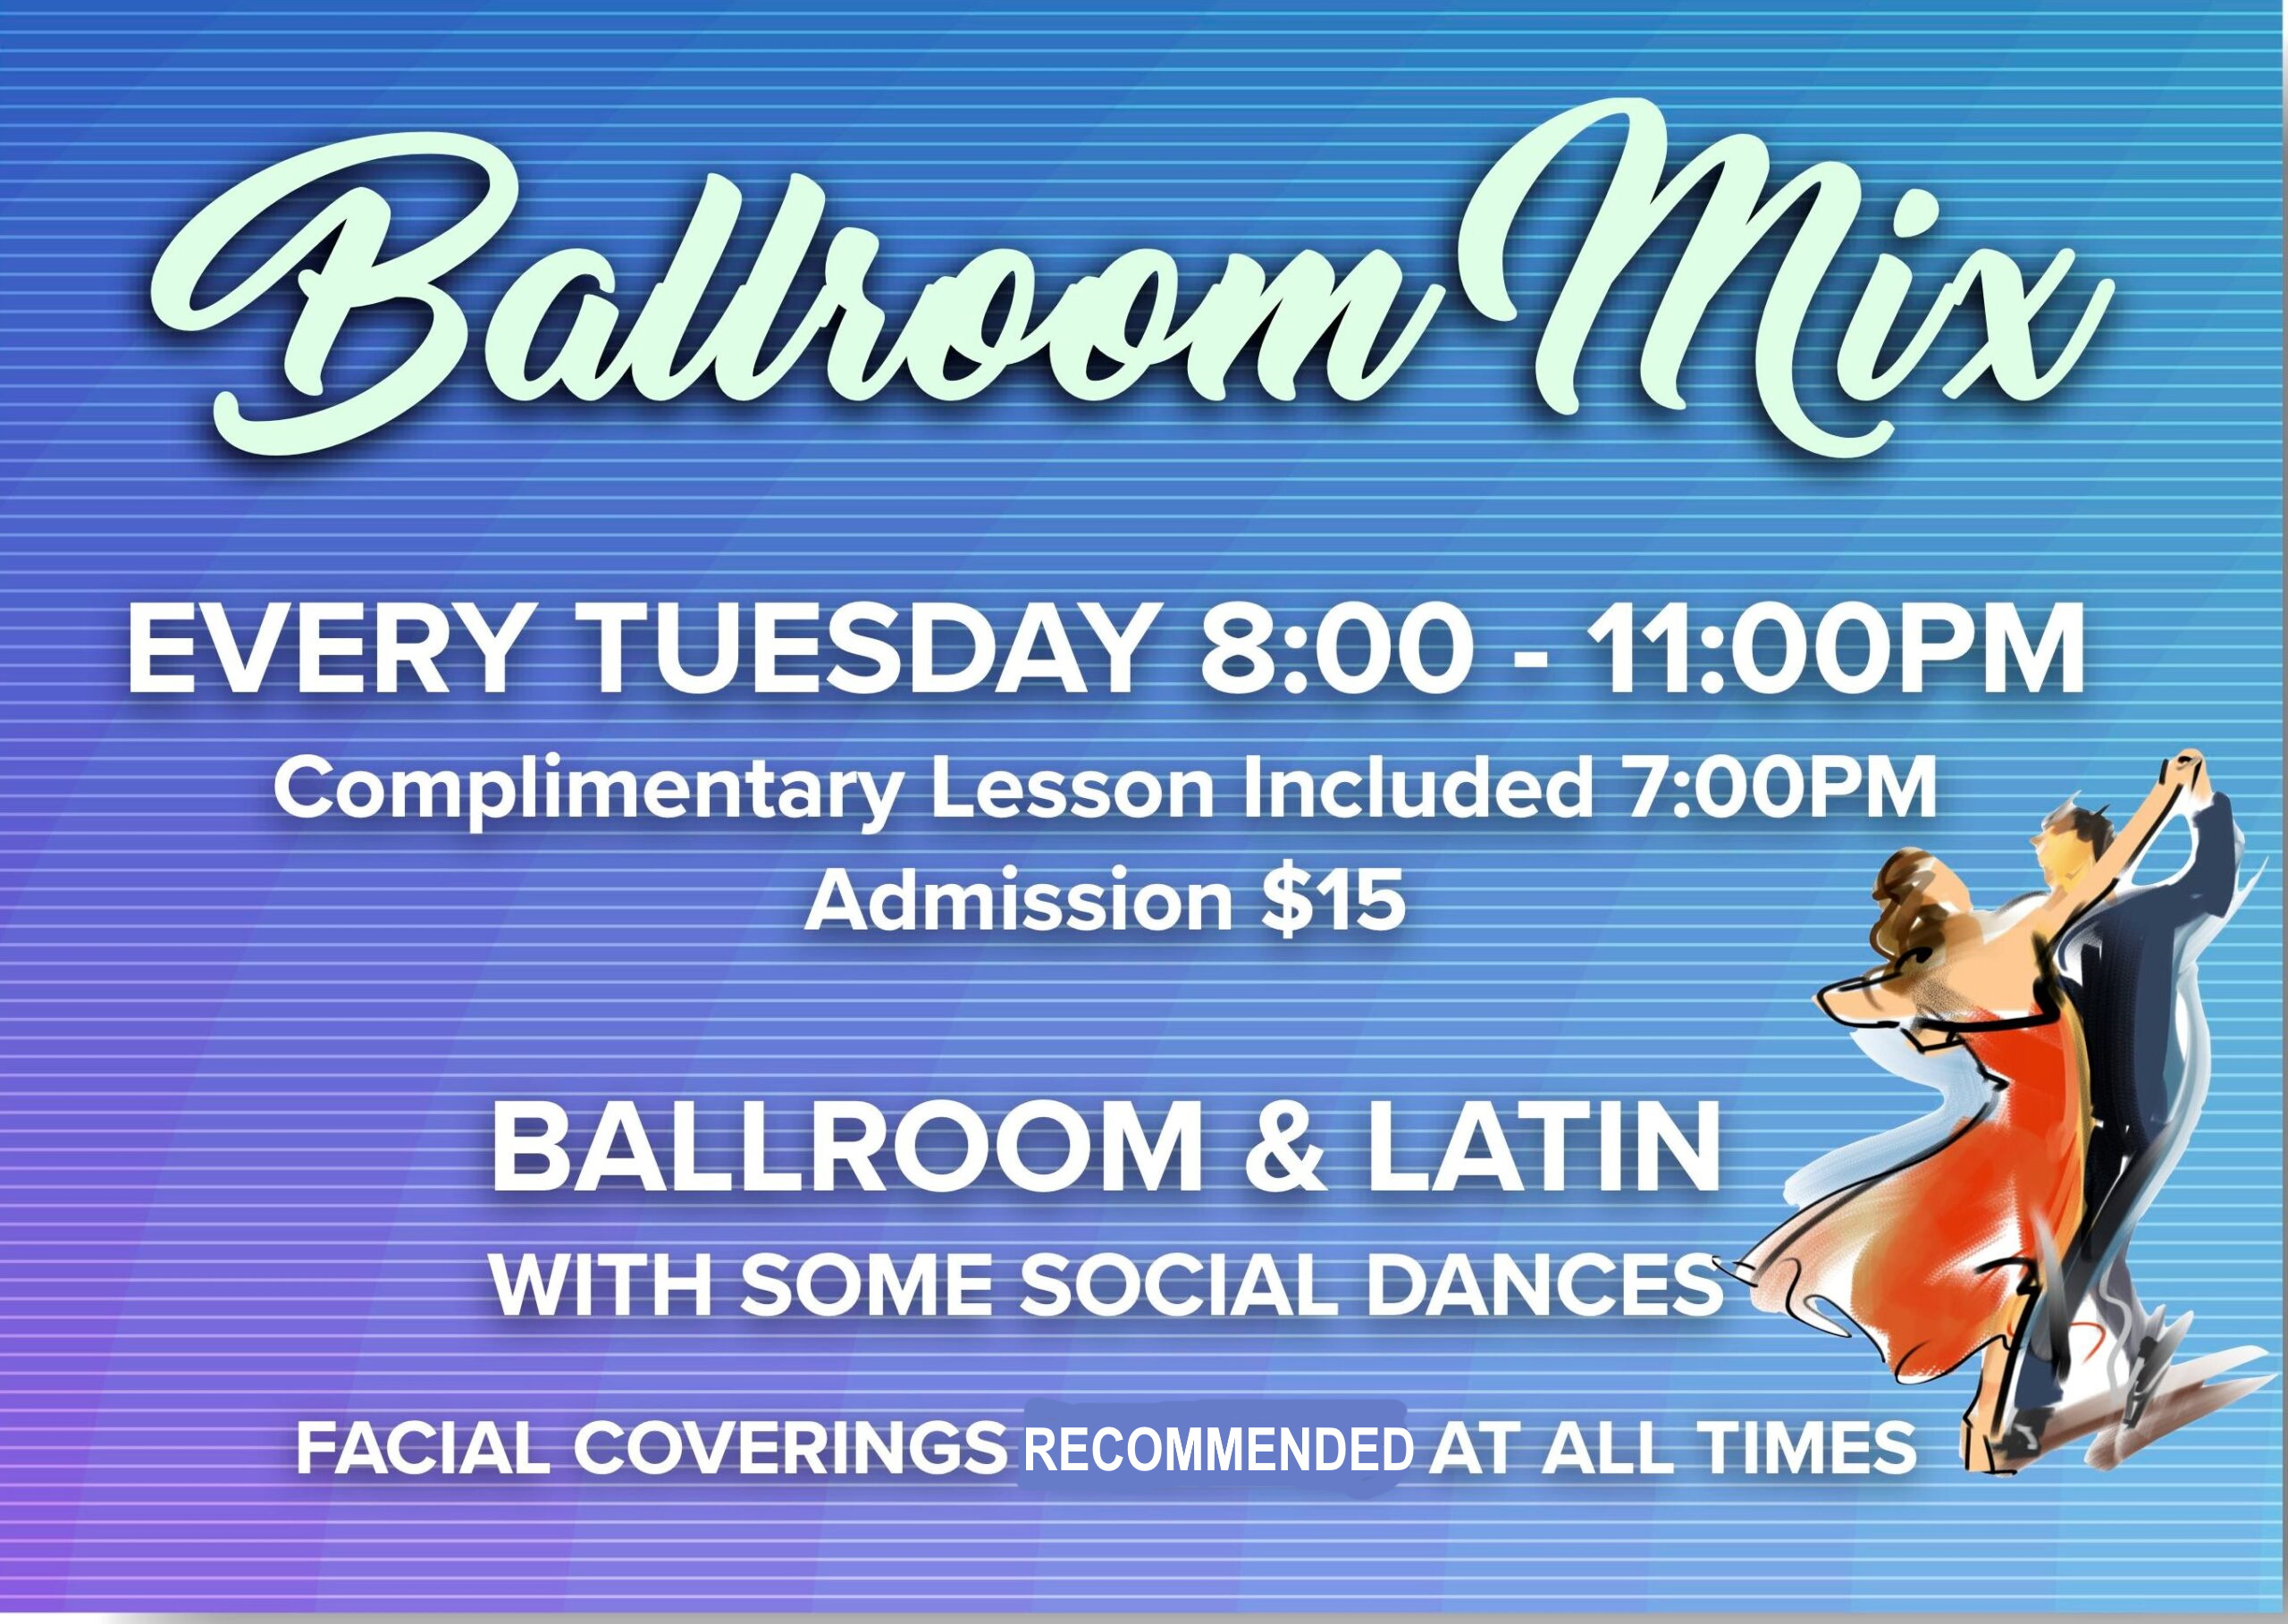 Ballroom & Latin Mix Every Tuesday Night at 8 PM at Goldcoast Ballroom! - Plus Complimentary Group Class at 7 PM!